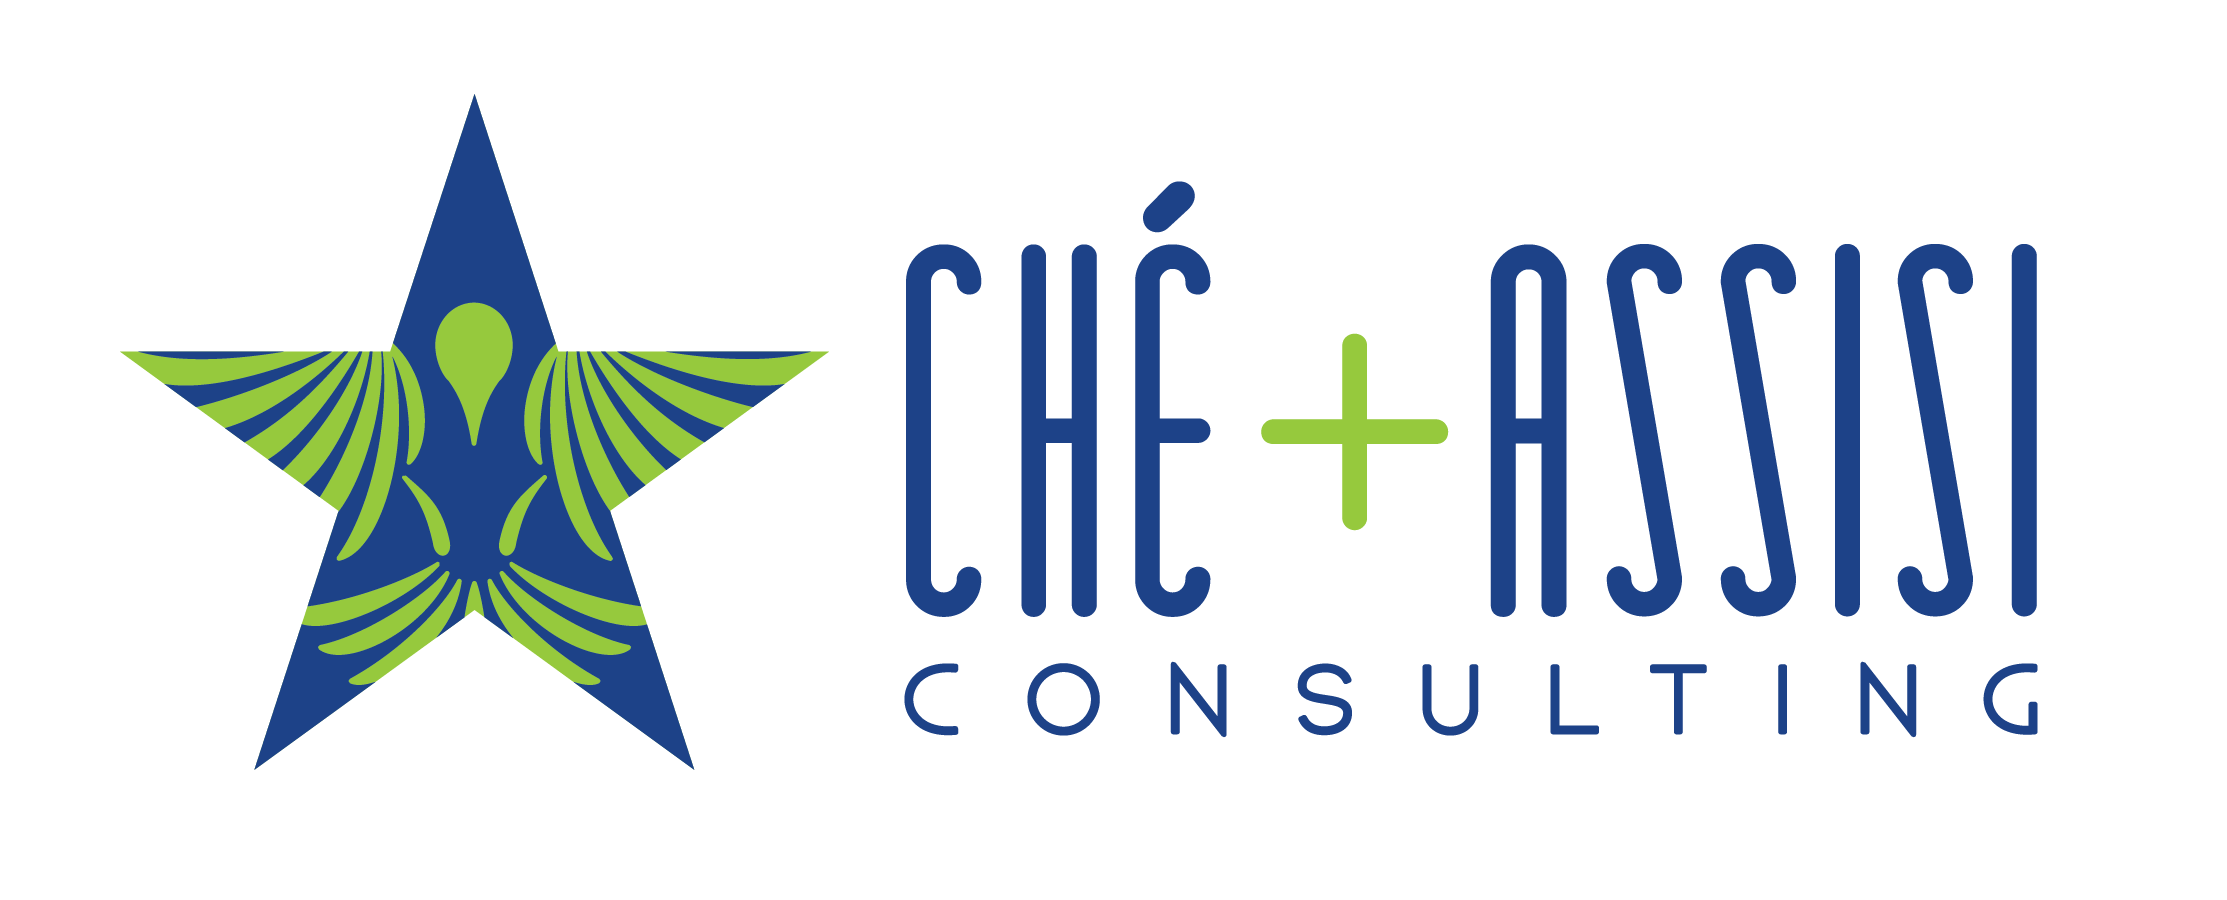 CheAssisi Consulting